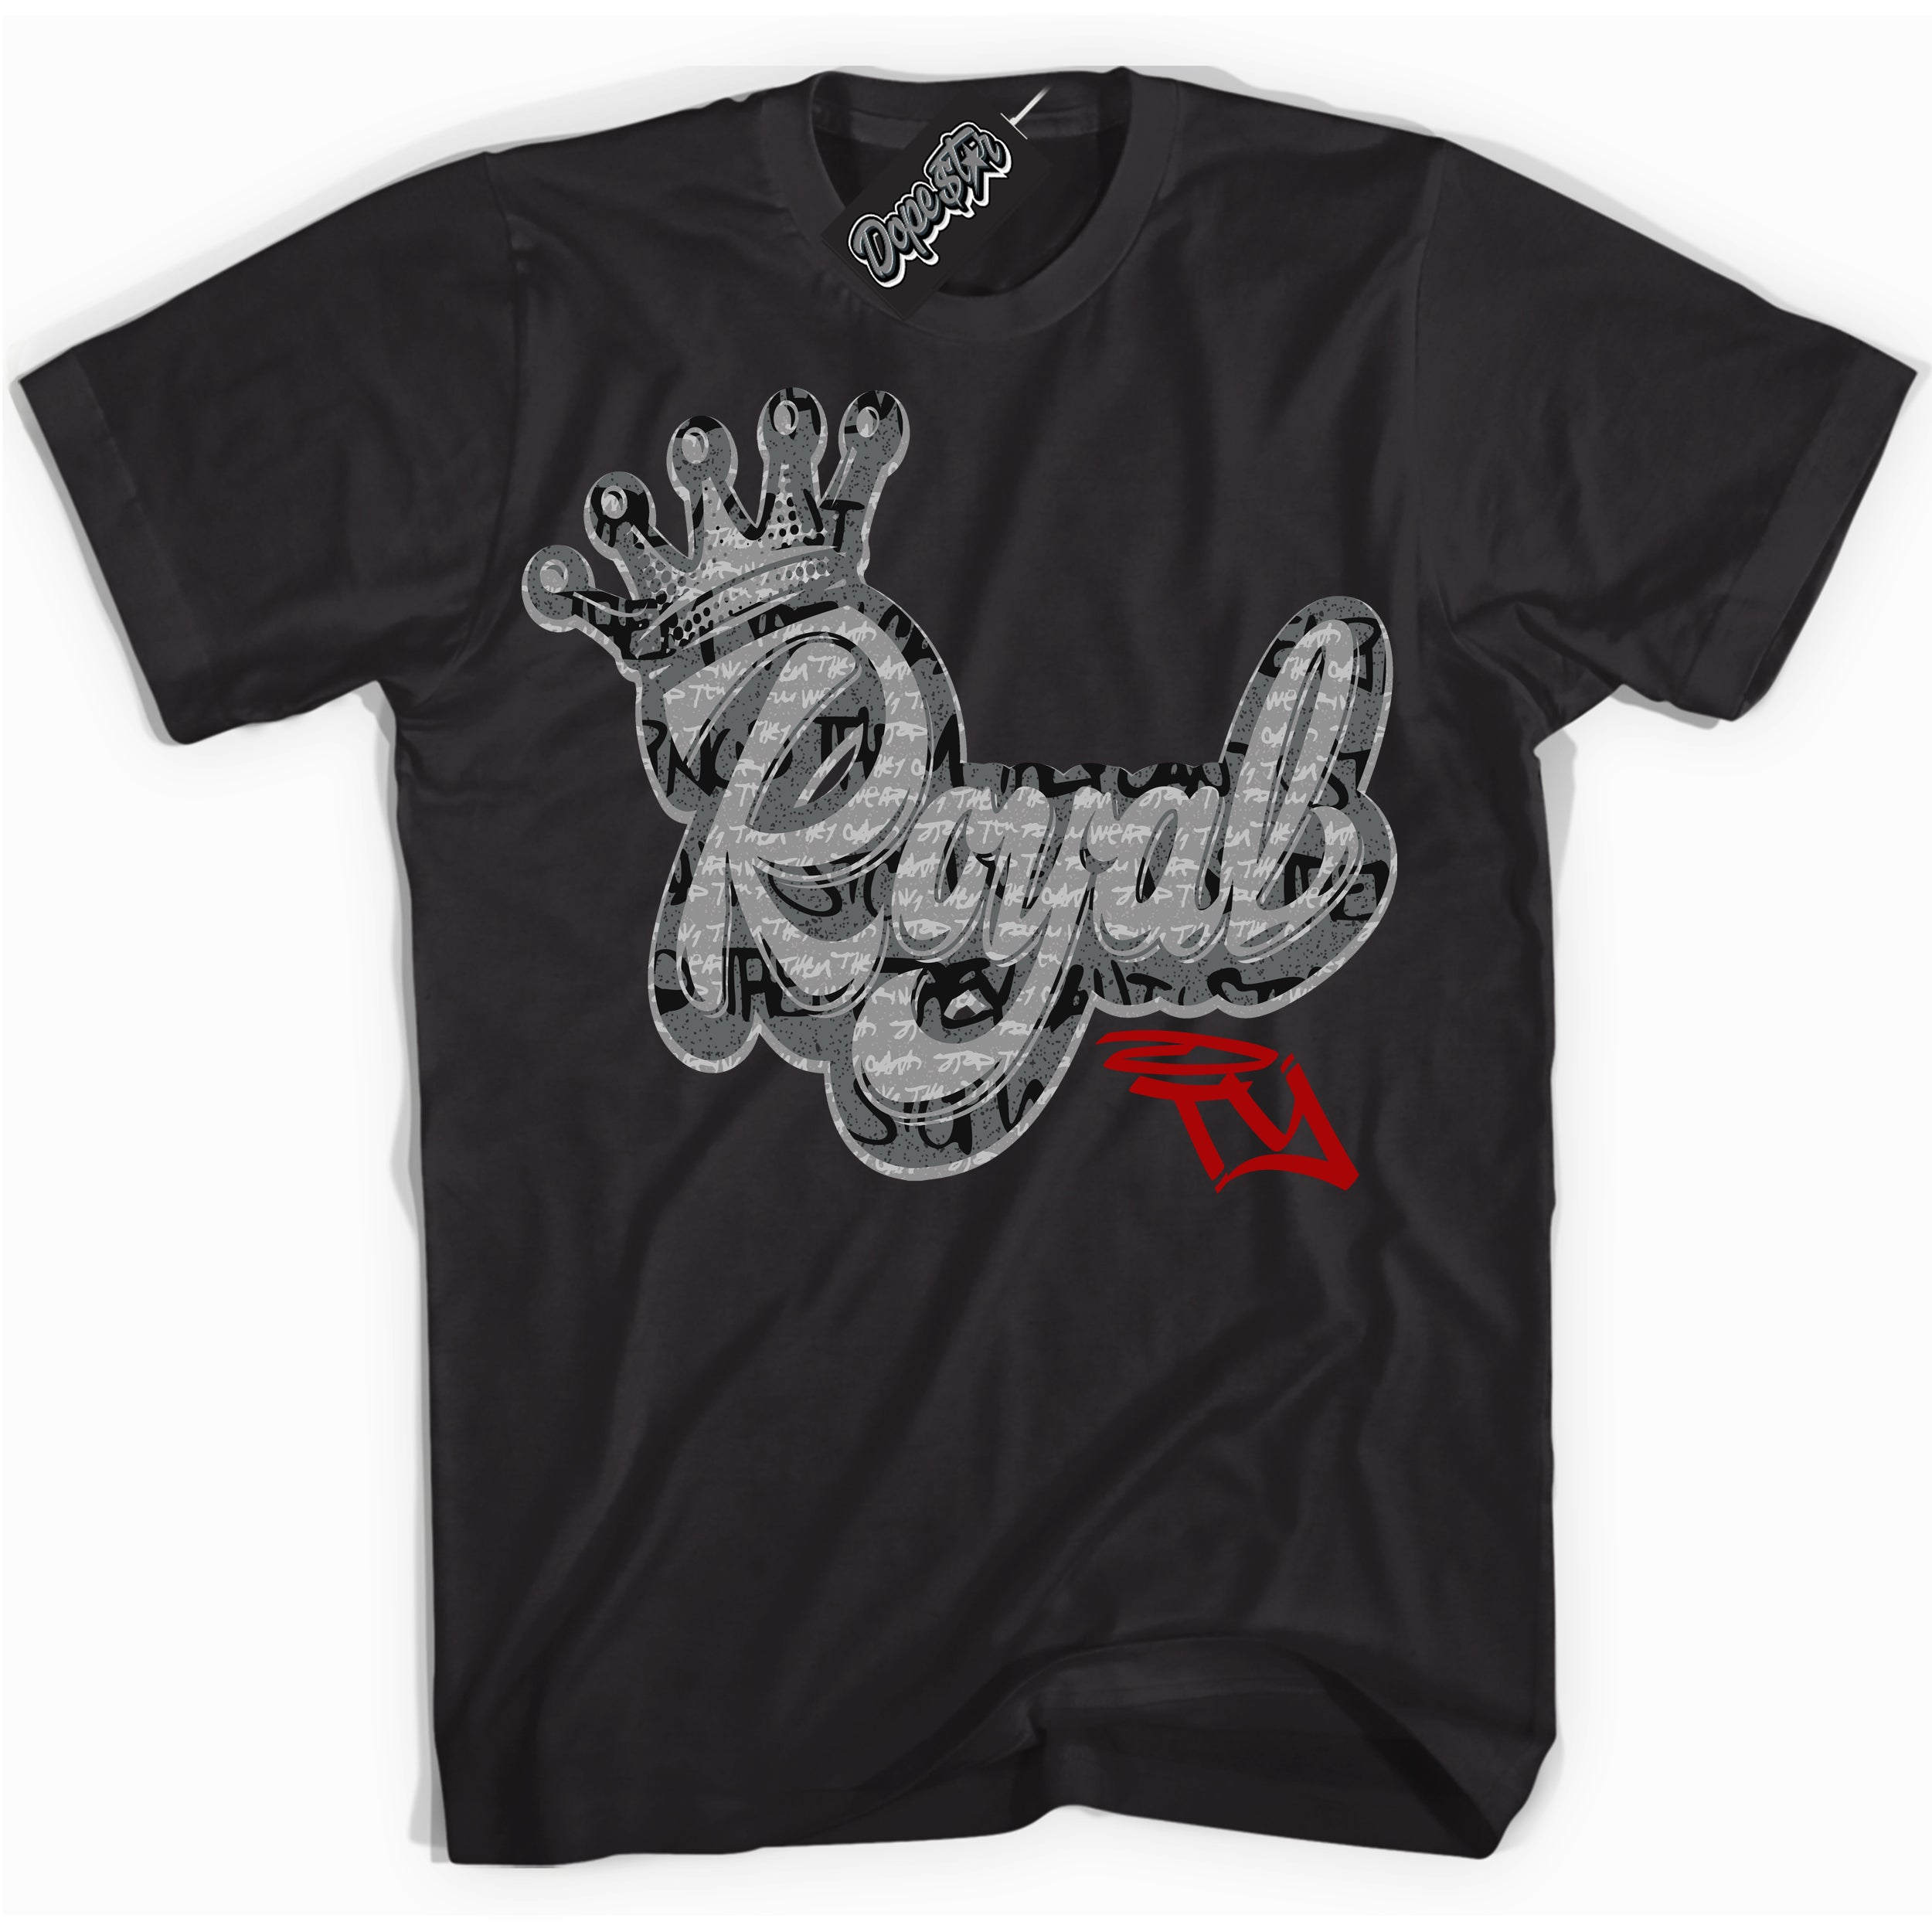 Cool Black Shirt with “ Royalty ” design that perfectly matches Rebellionaire 1s Sneakers.